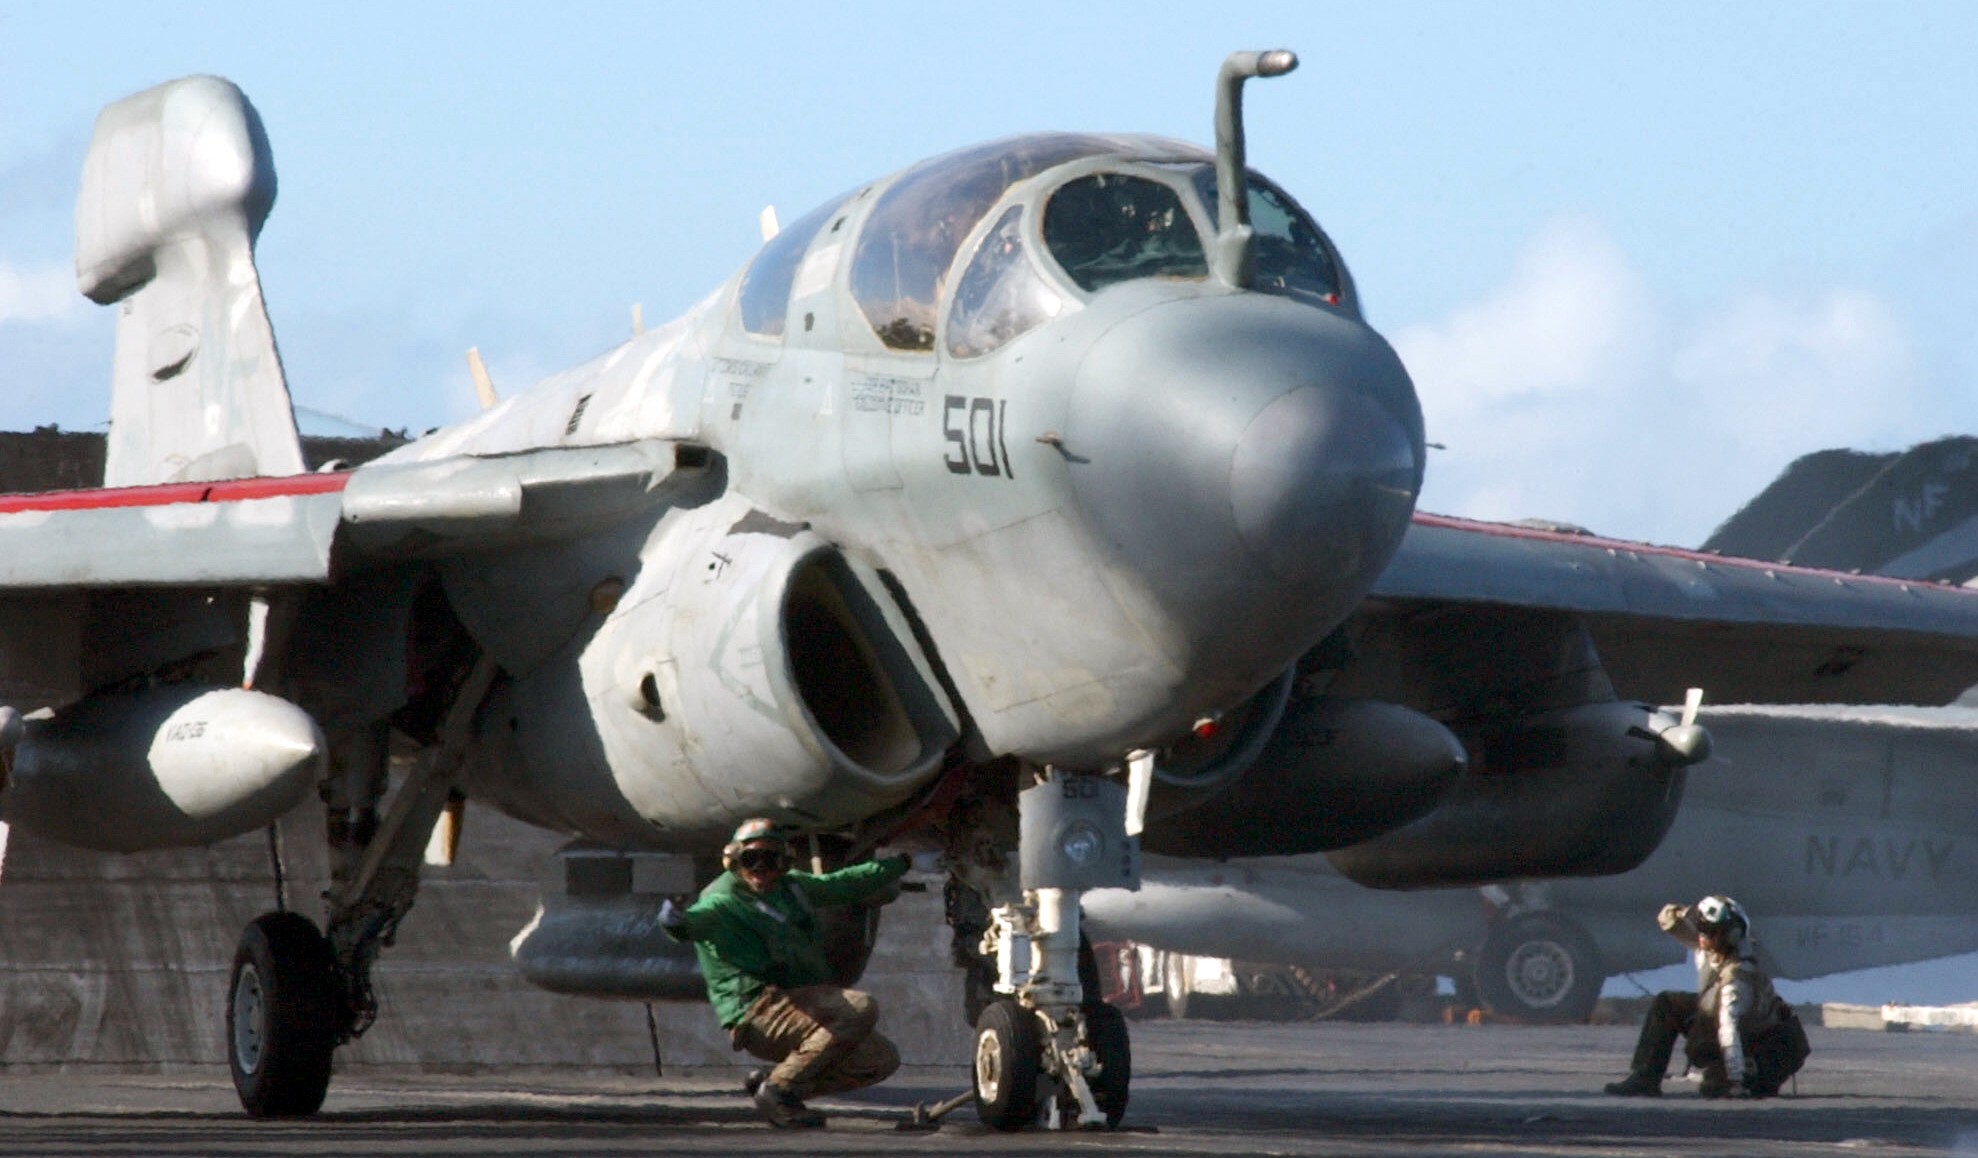 vaq-136 gauntlets electronic attack squadron vaqron us navy ea-6b prowler carrier air wing cvw-5 uss kitty hawk cv-63 38